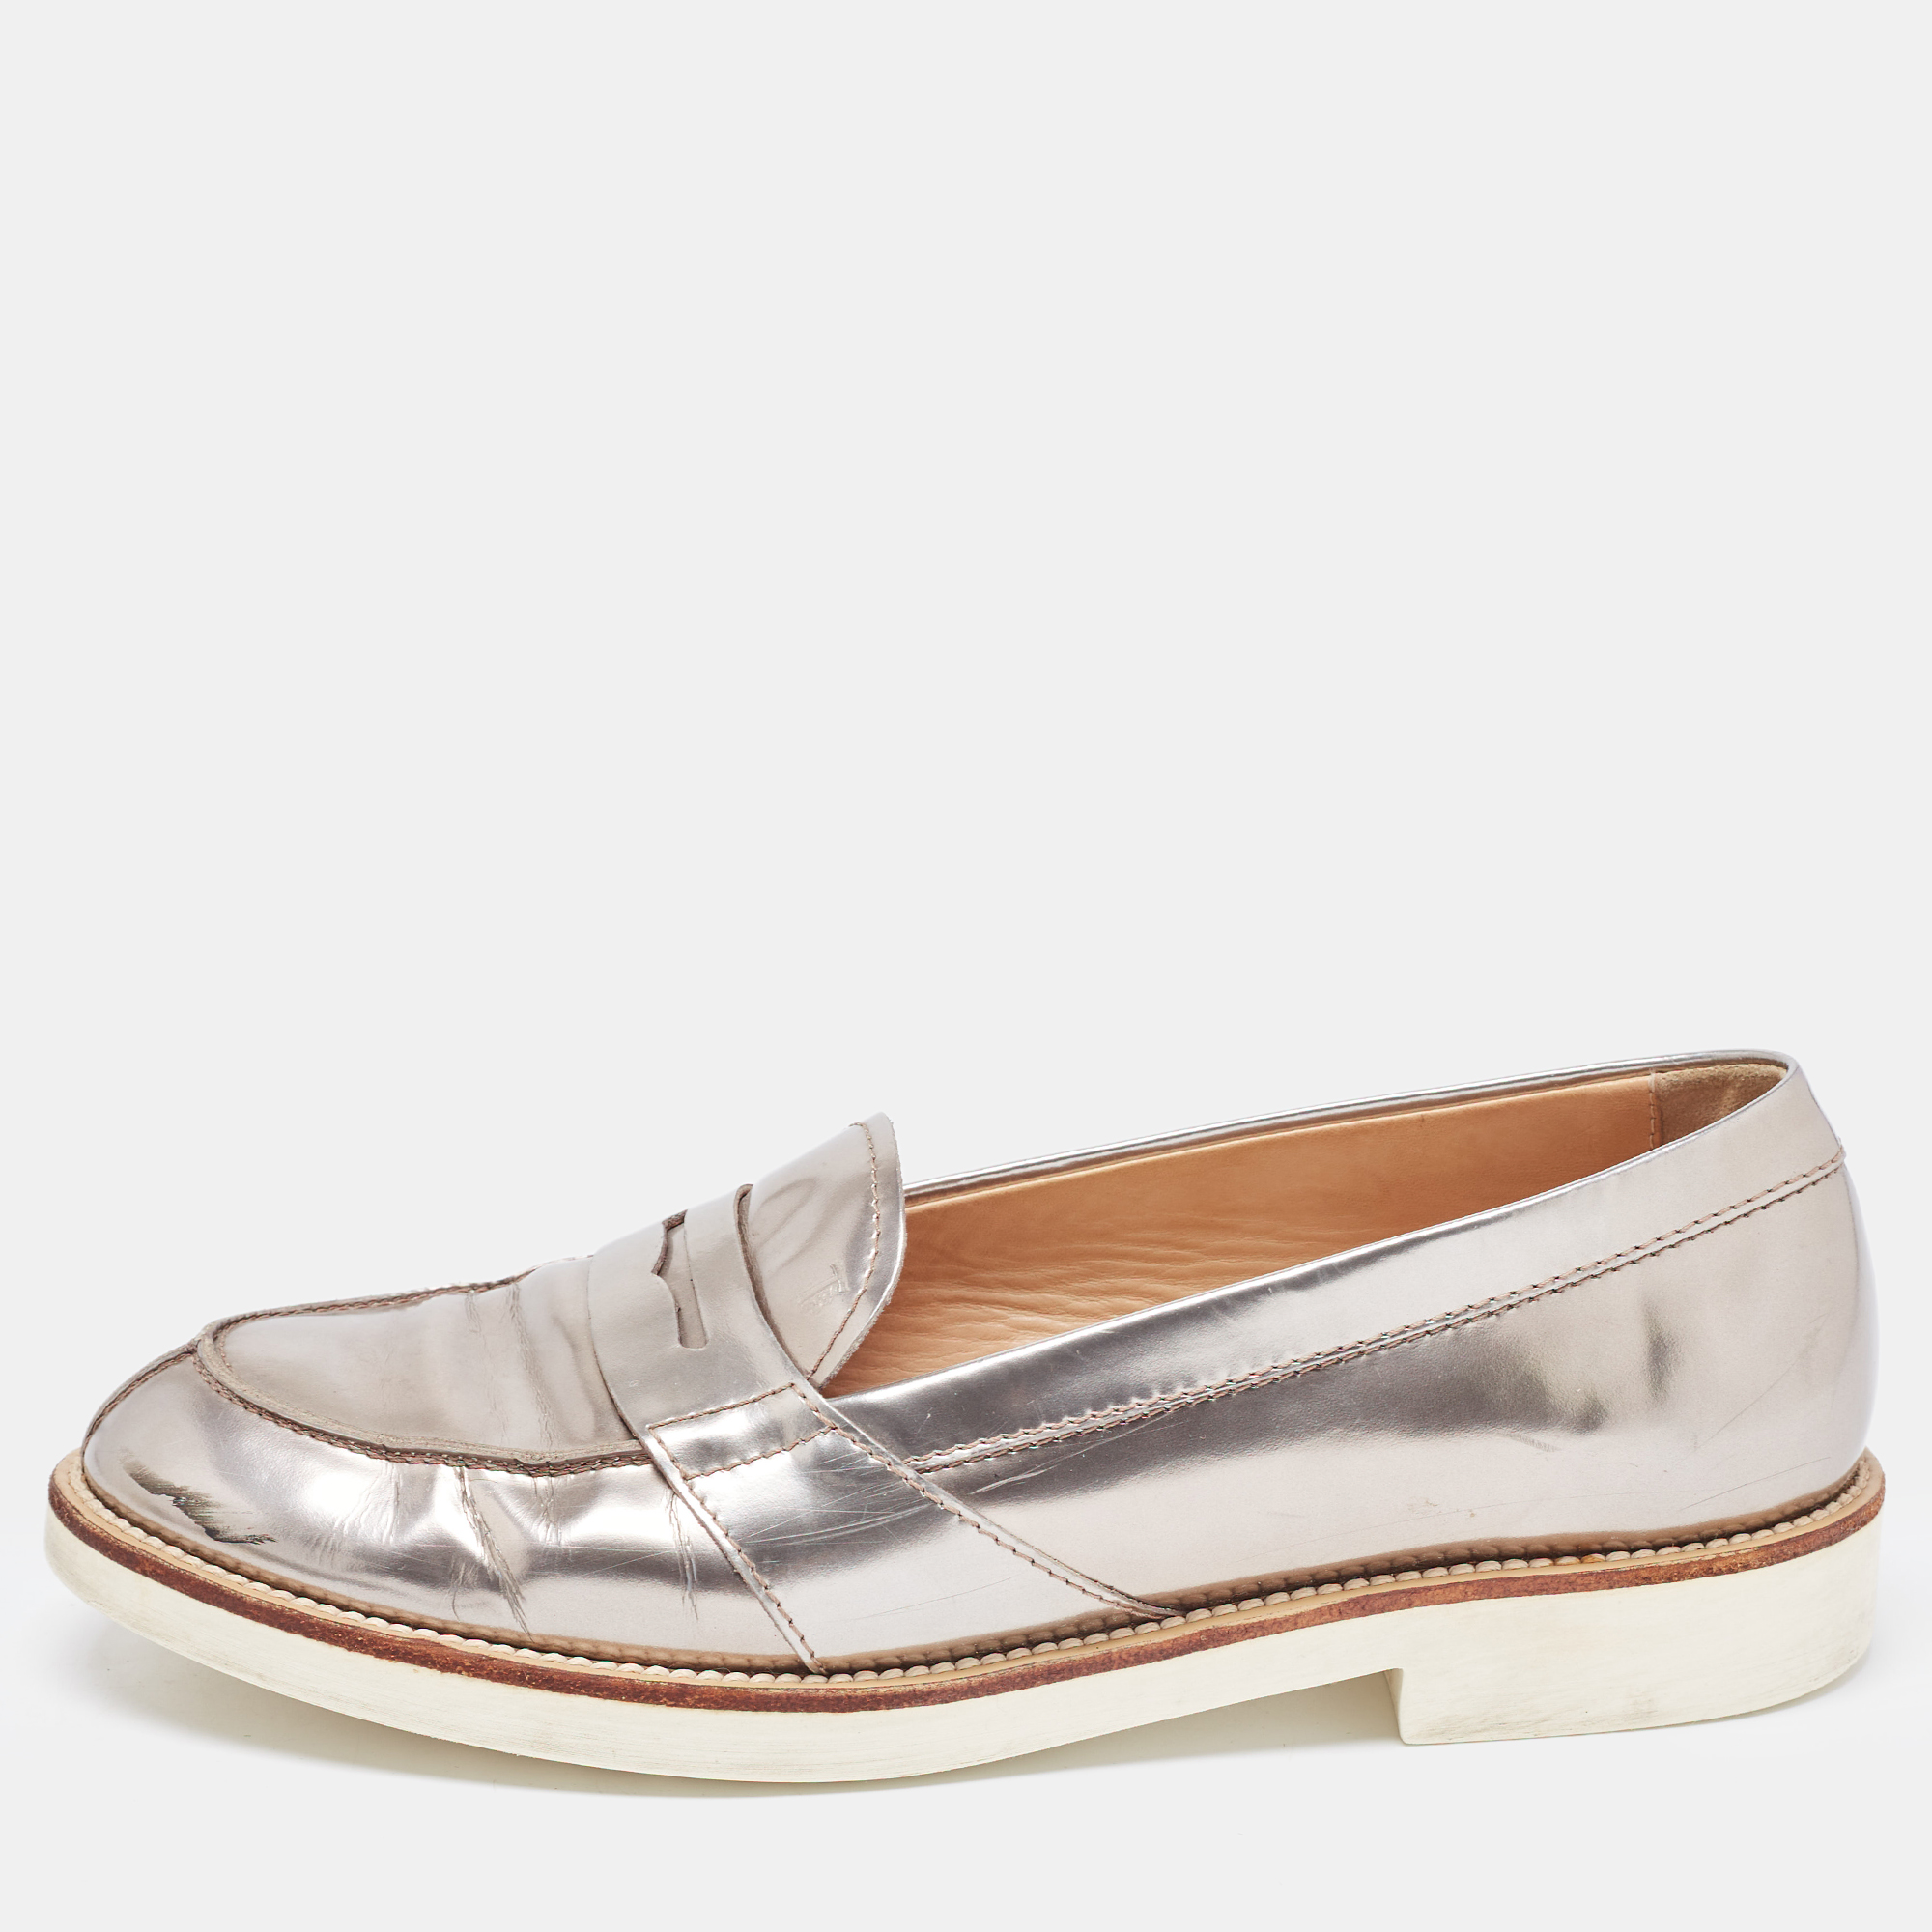 Pre-owned Tod's Metallic Silver Leather Penny Loafers Size 37